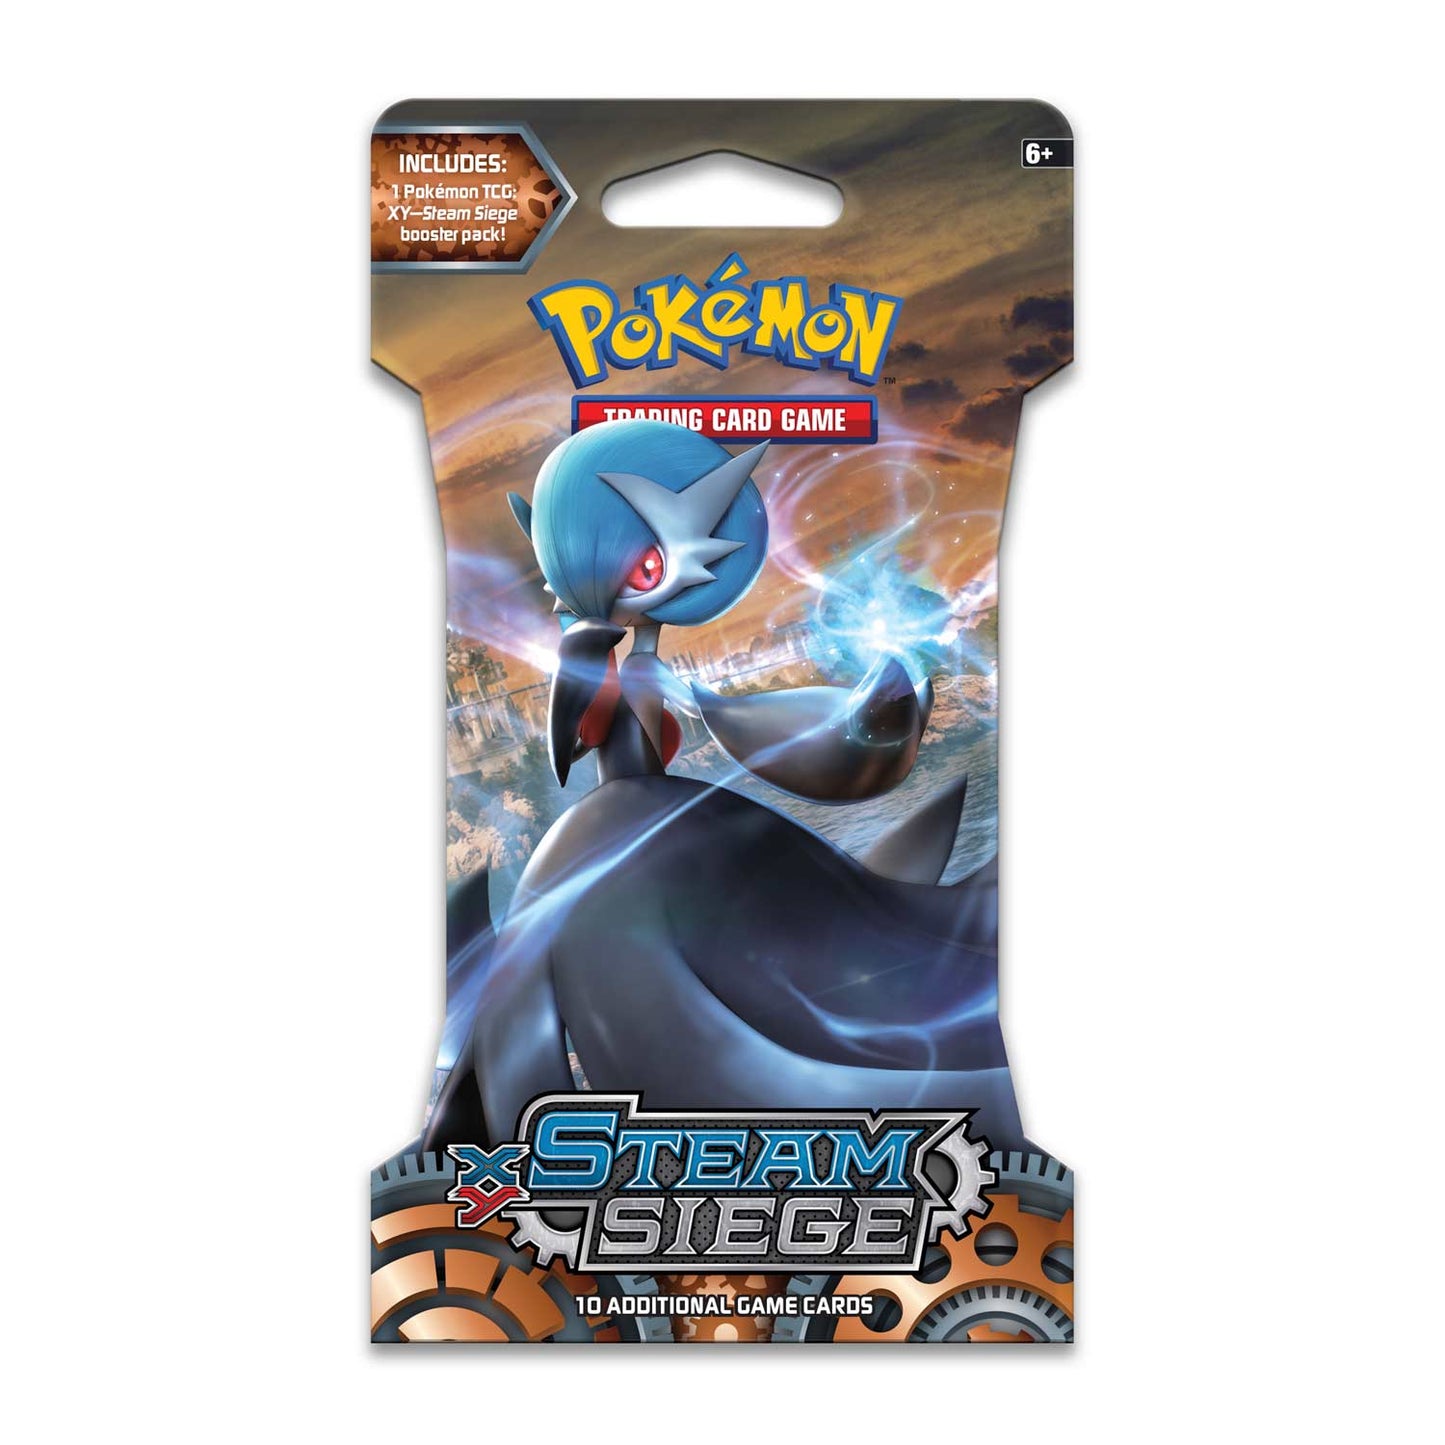 POKÉMON - STEAM SIEGE - BOOSTER PACK BLISTER / SLEEVED - XY